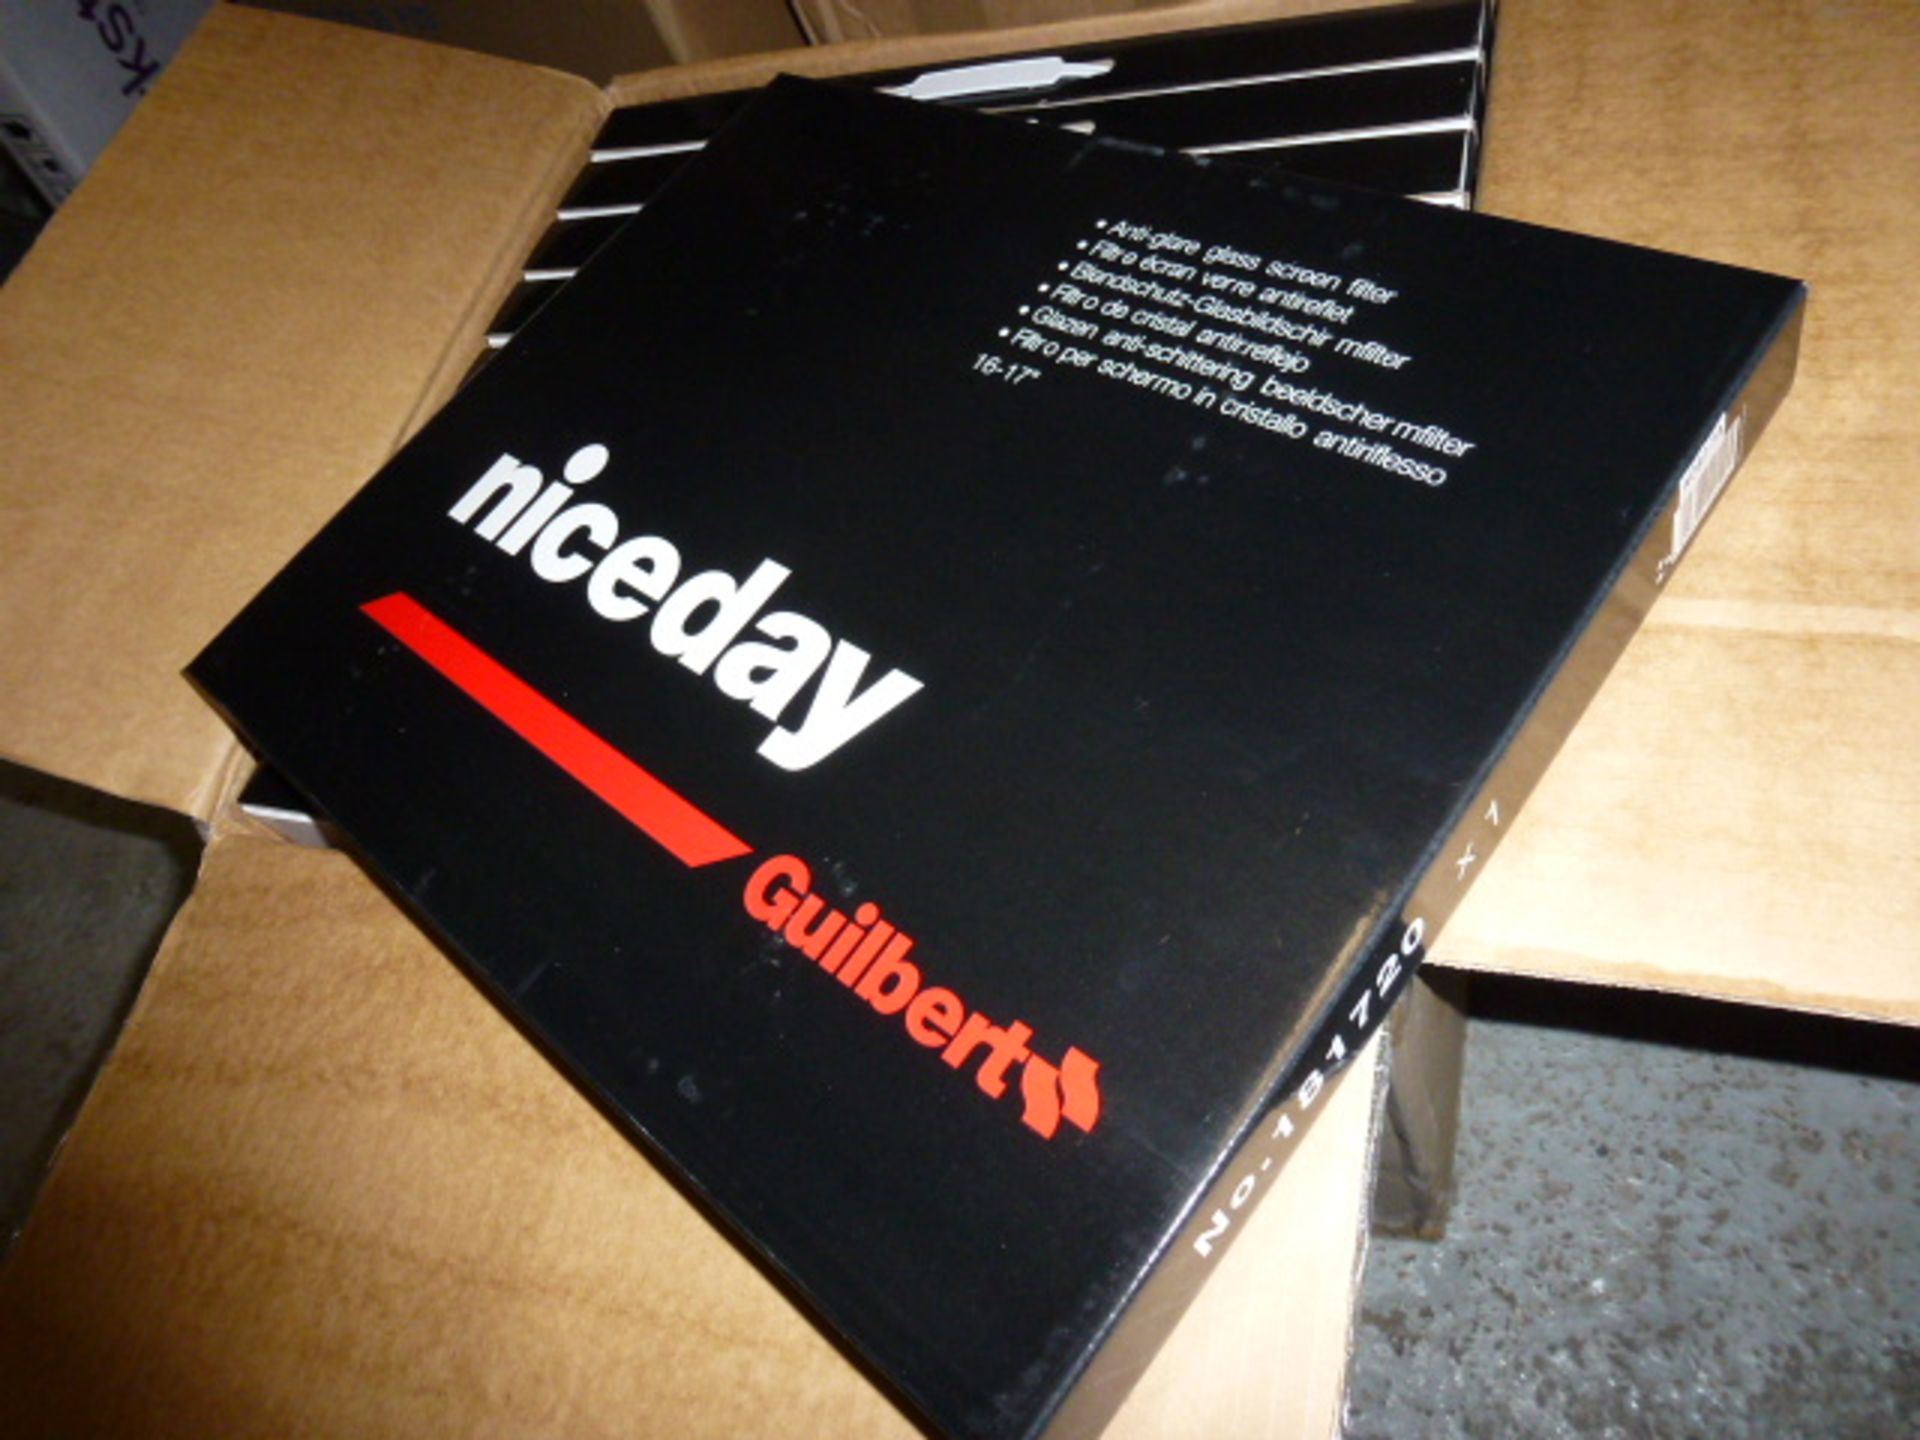 5 x Guilbert Niceday ANTI-GLARE SCREEN FILTERS For 16-17 Inch PC Monitors - Suitable For TFT or - Image 6 of 7